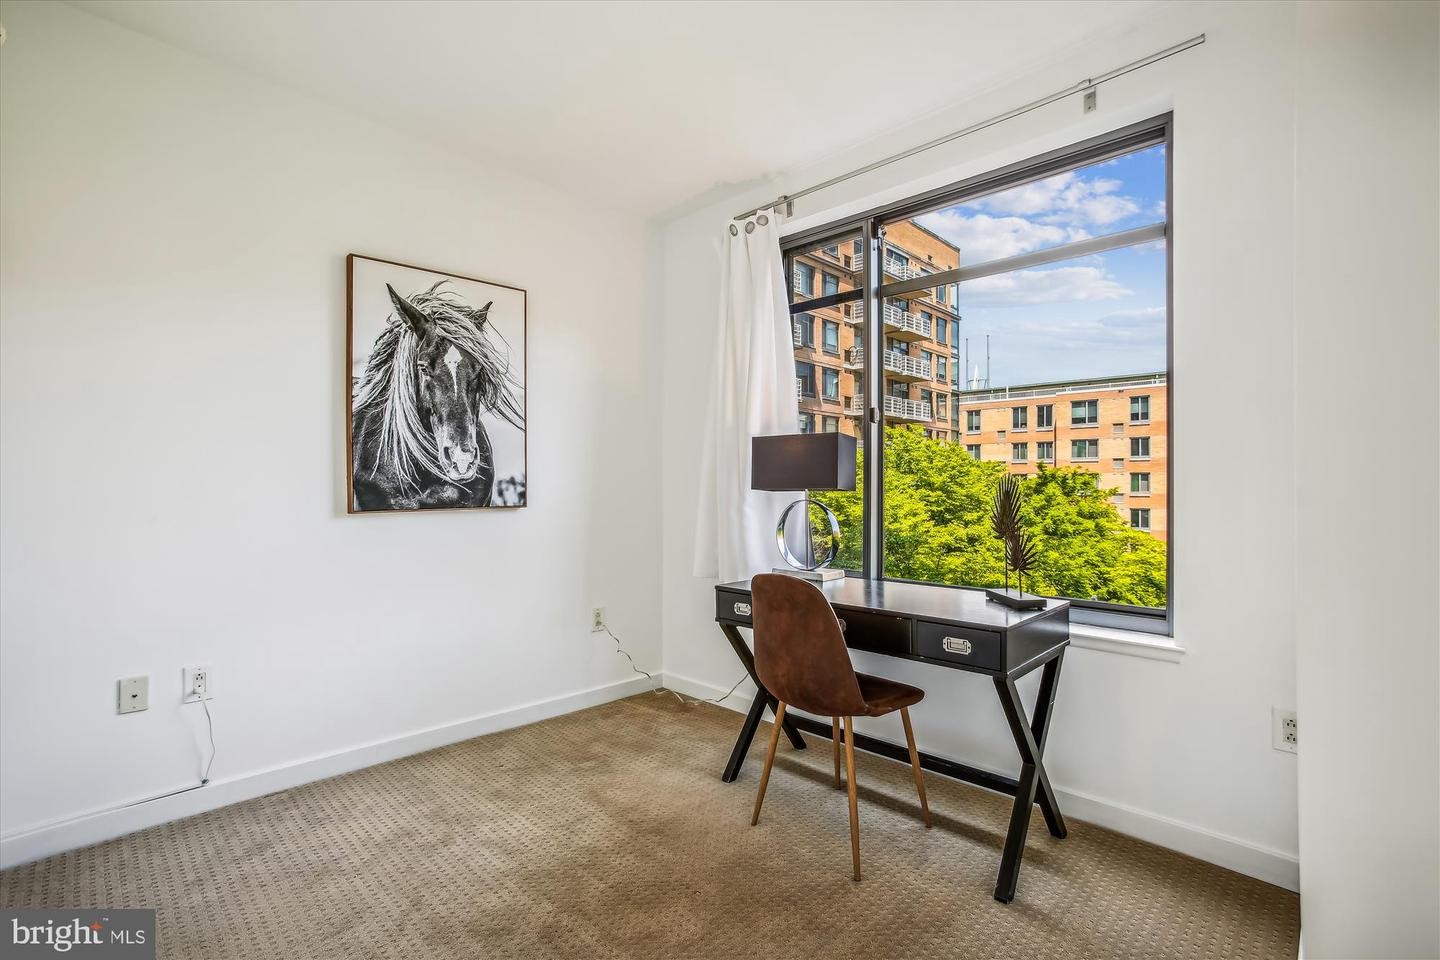 25. 475 K St NW 